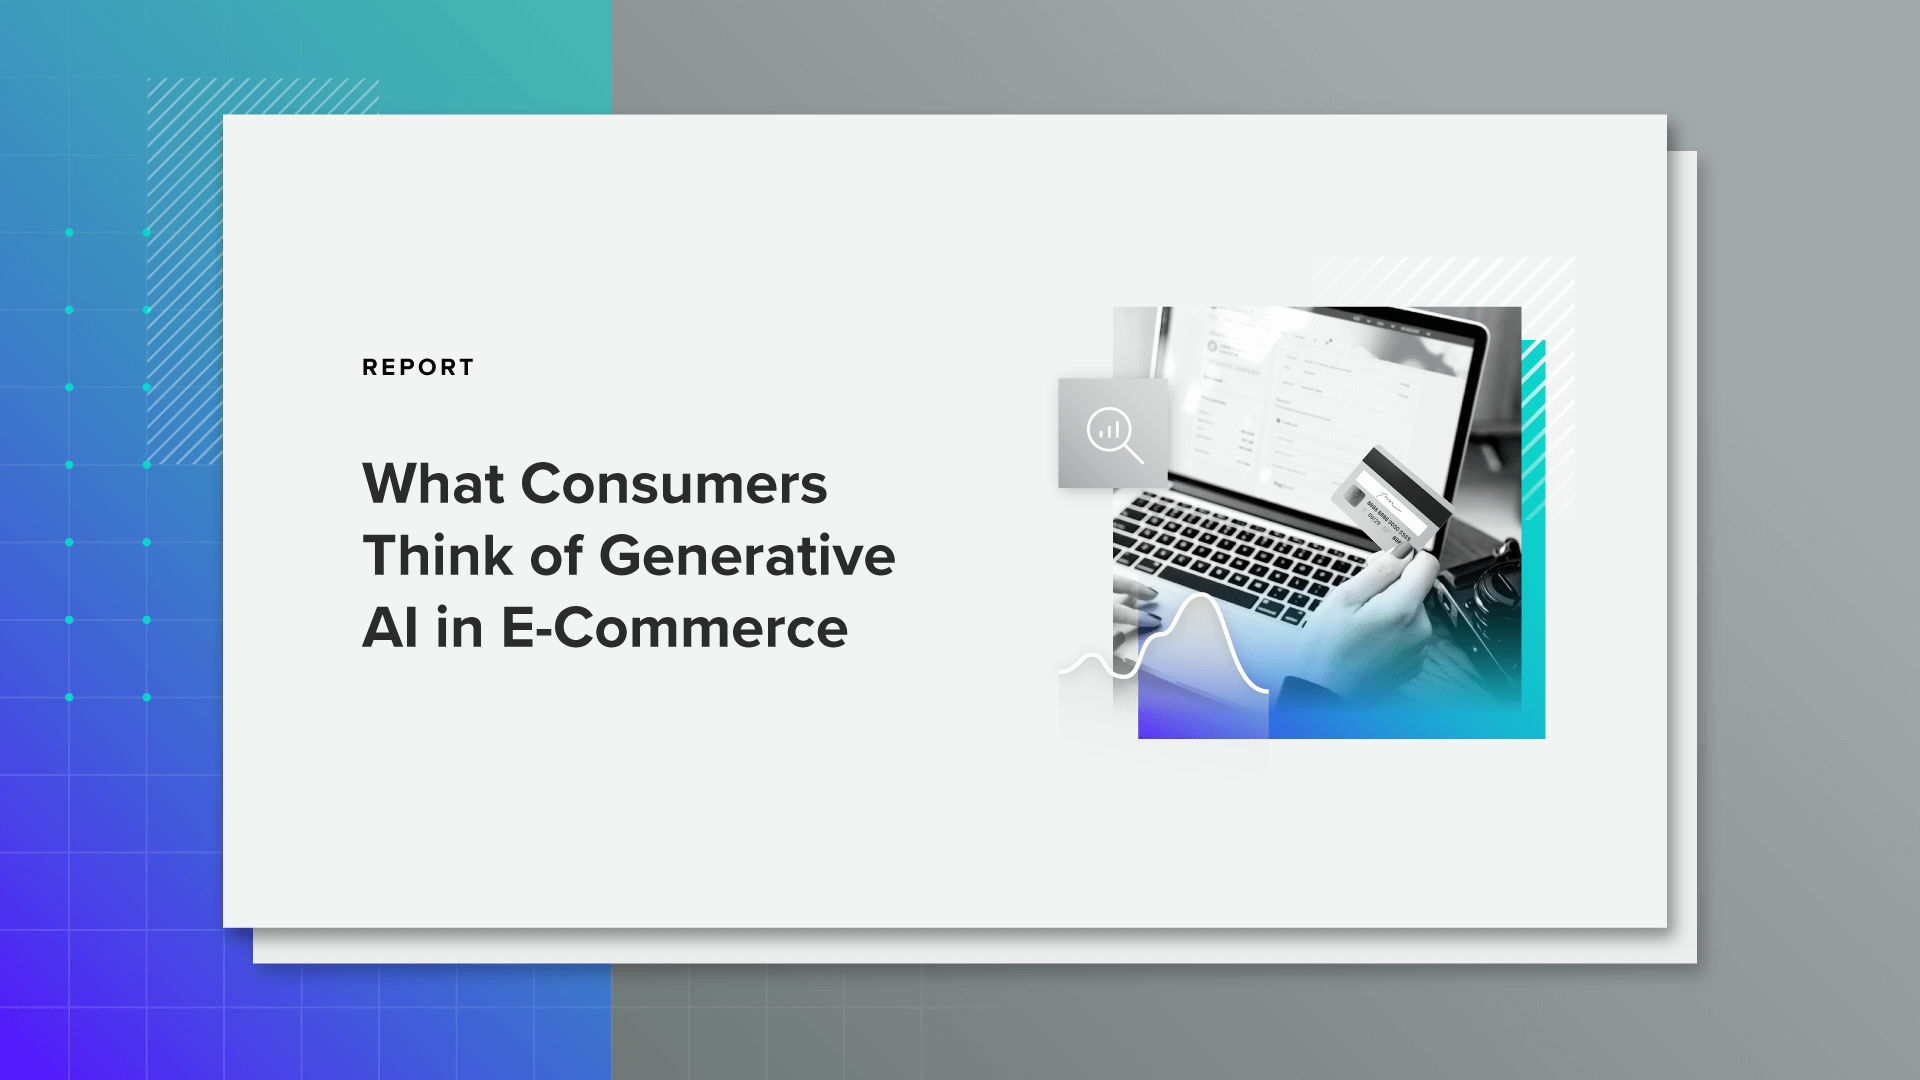 Download the Report: What Consumers Think of Generative AI in E-Commerce